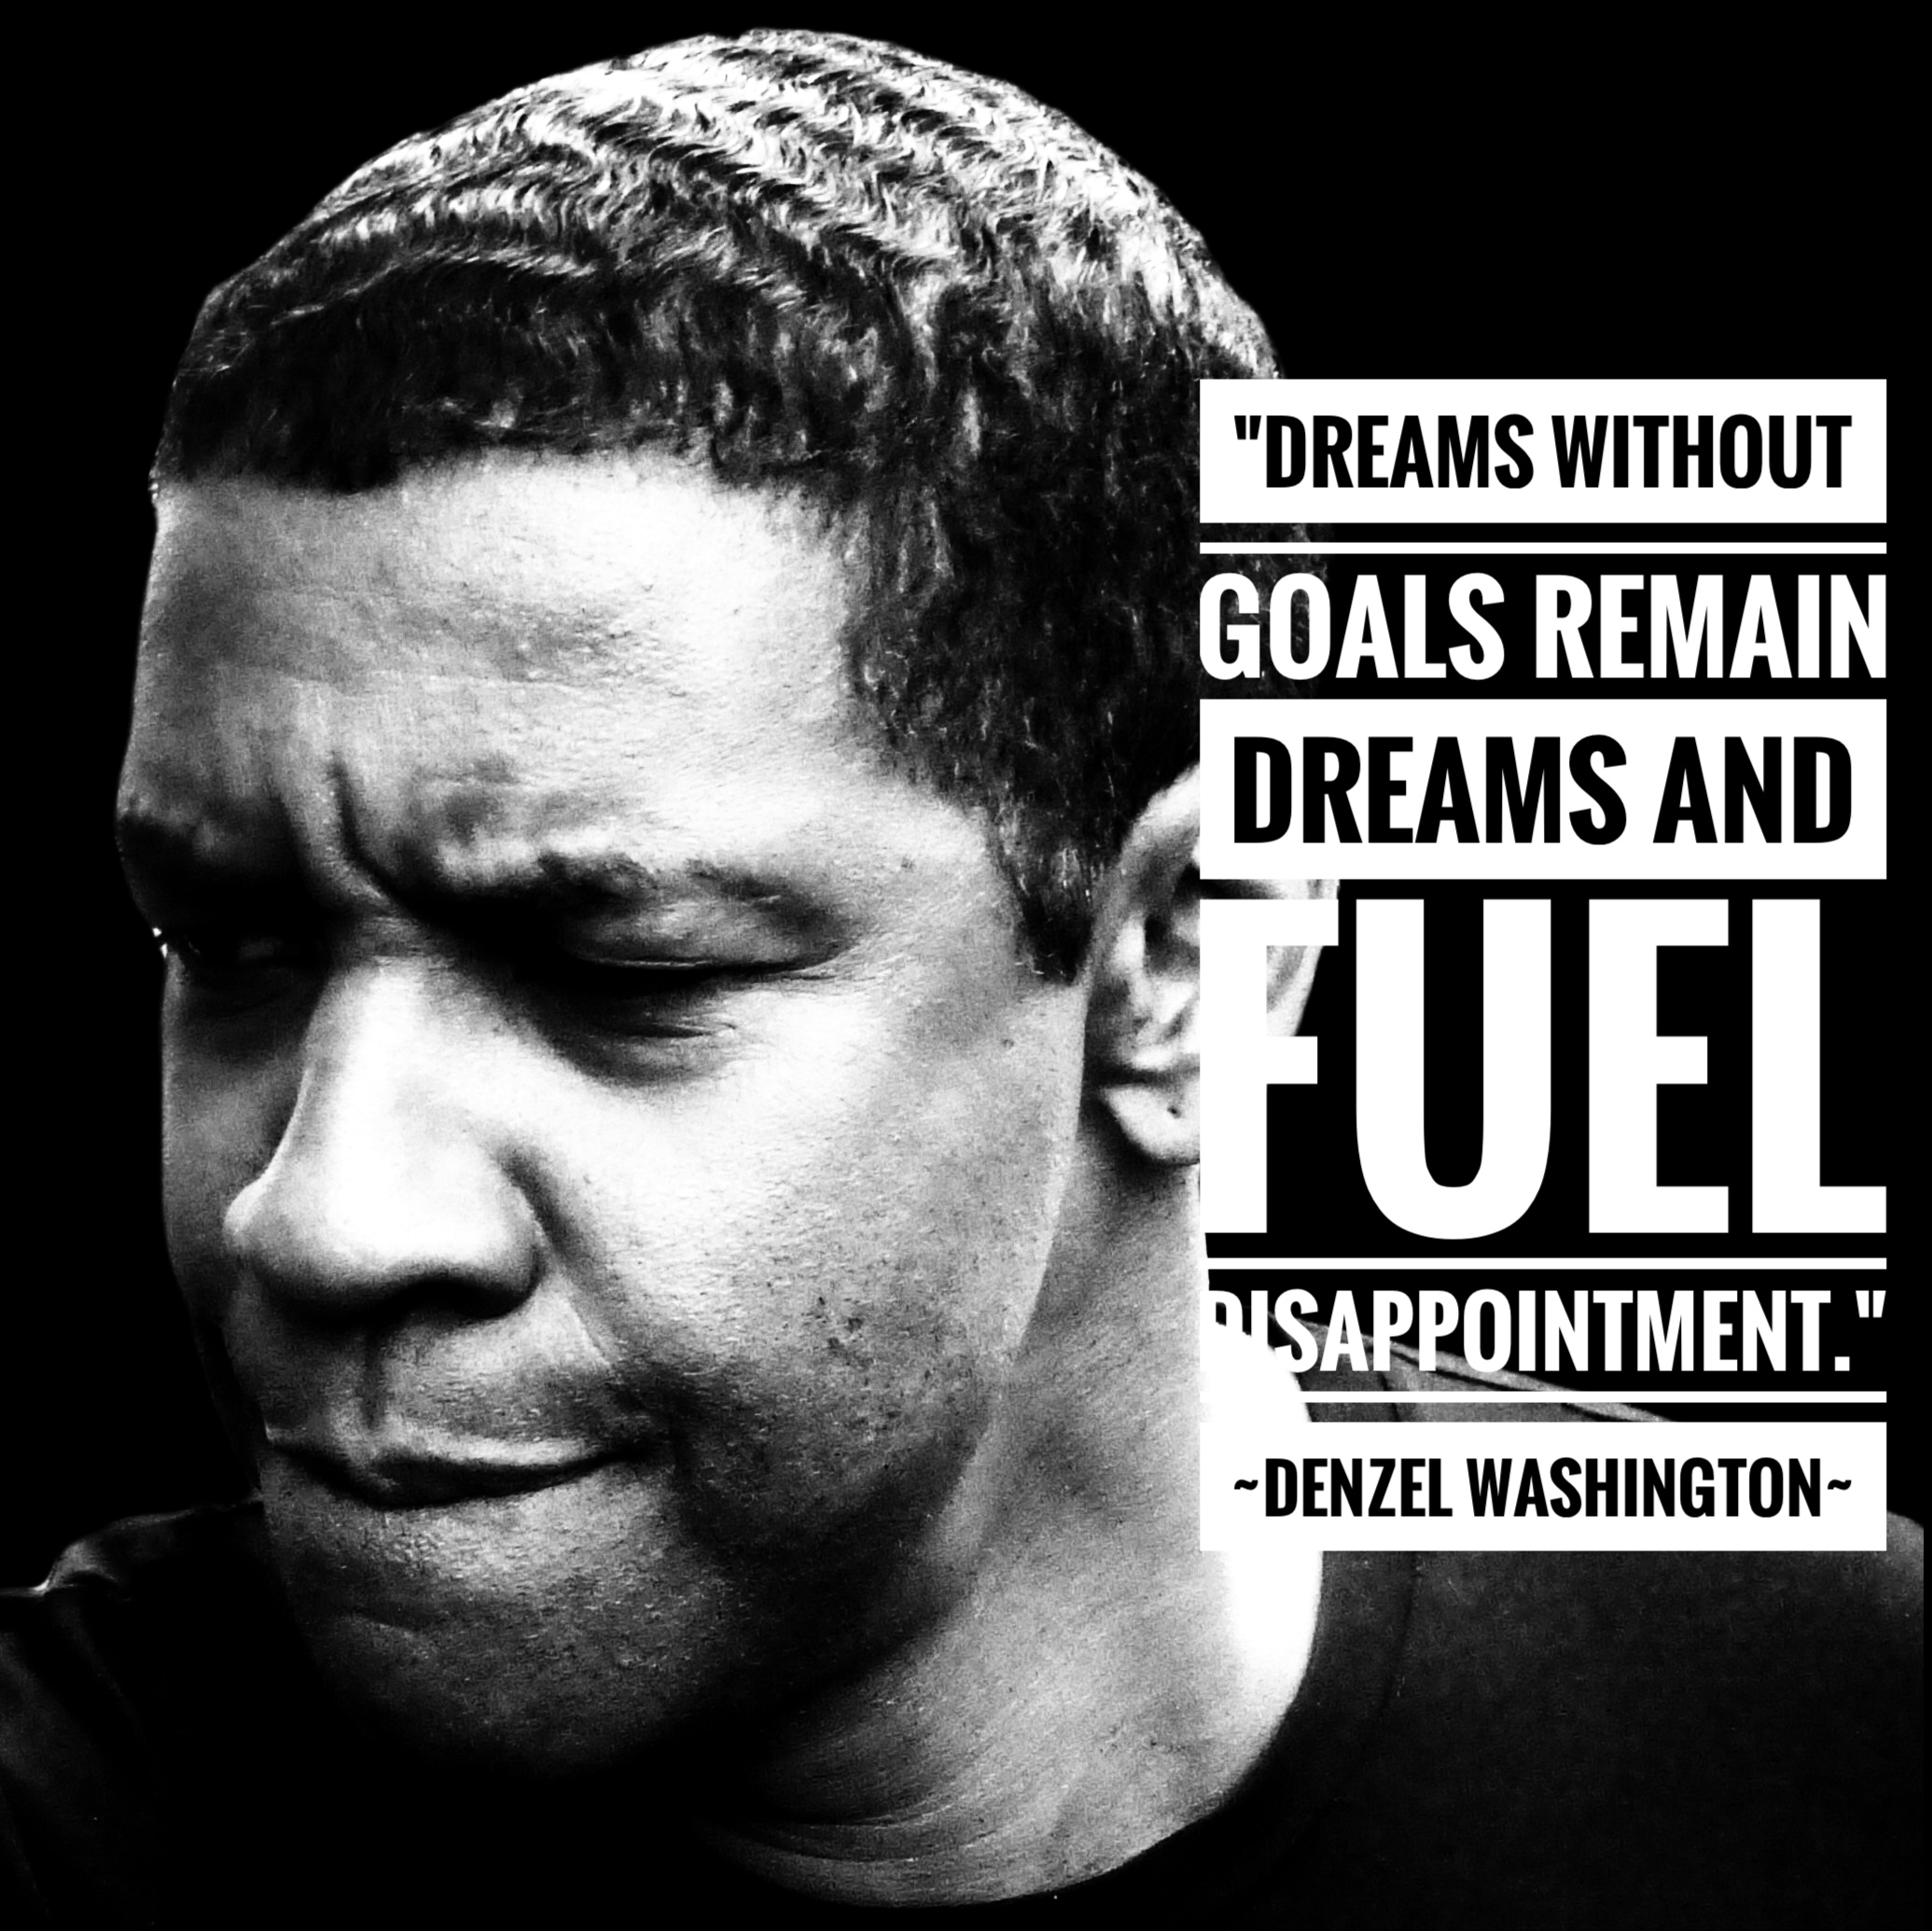 Picture of Denzel Washington with the quote "Dreams without goals remain dreams and fuel disappointment."